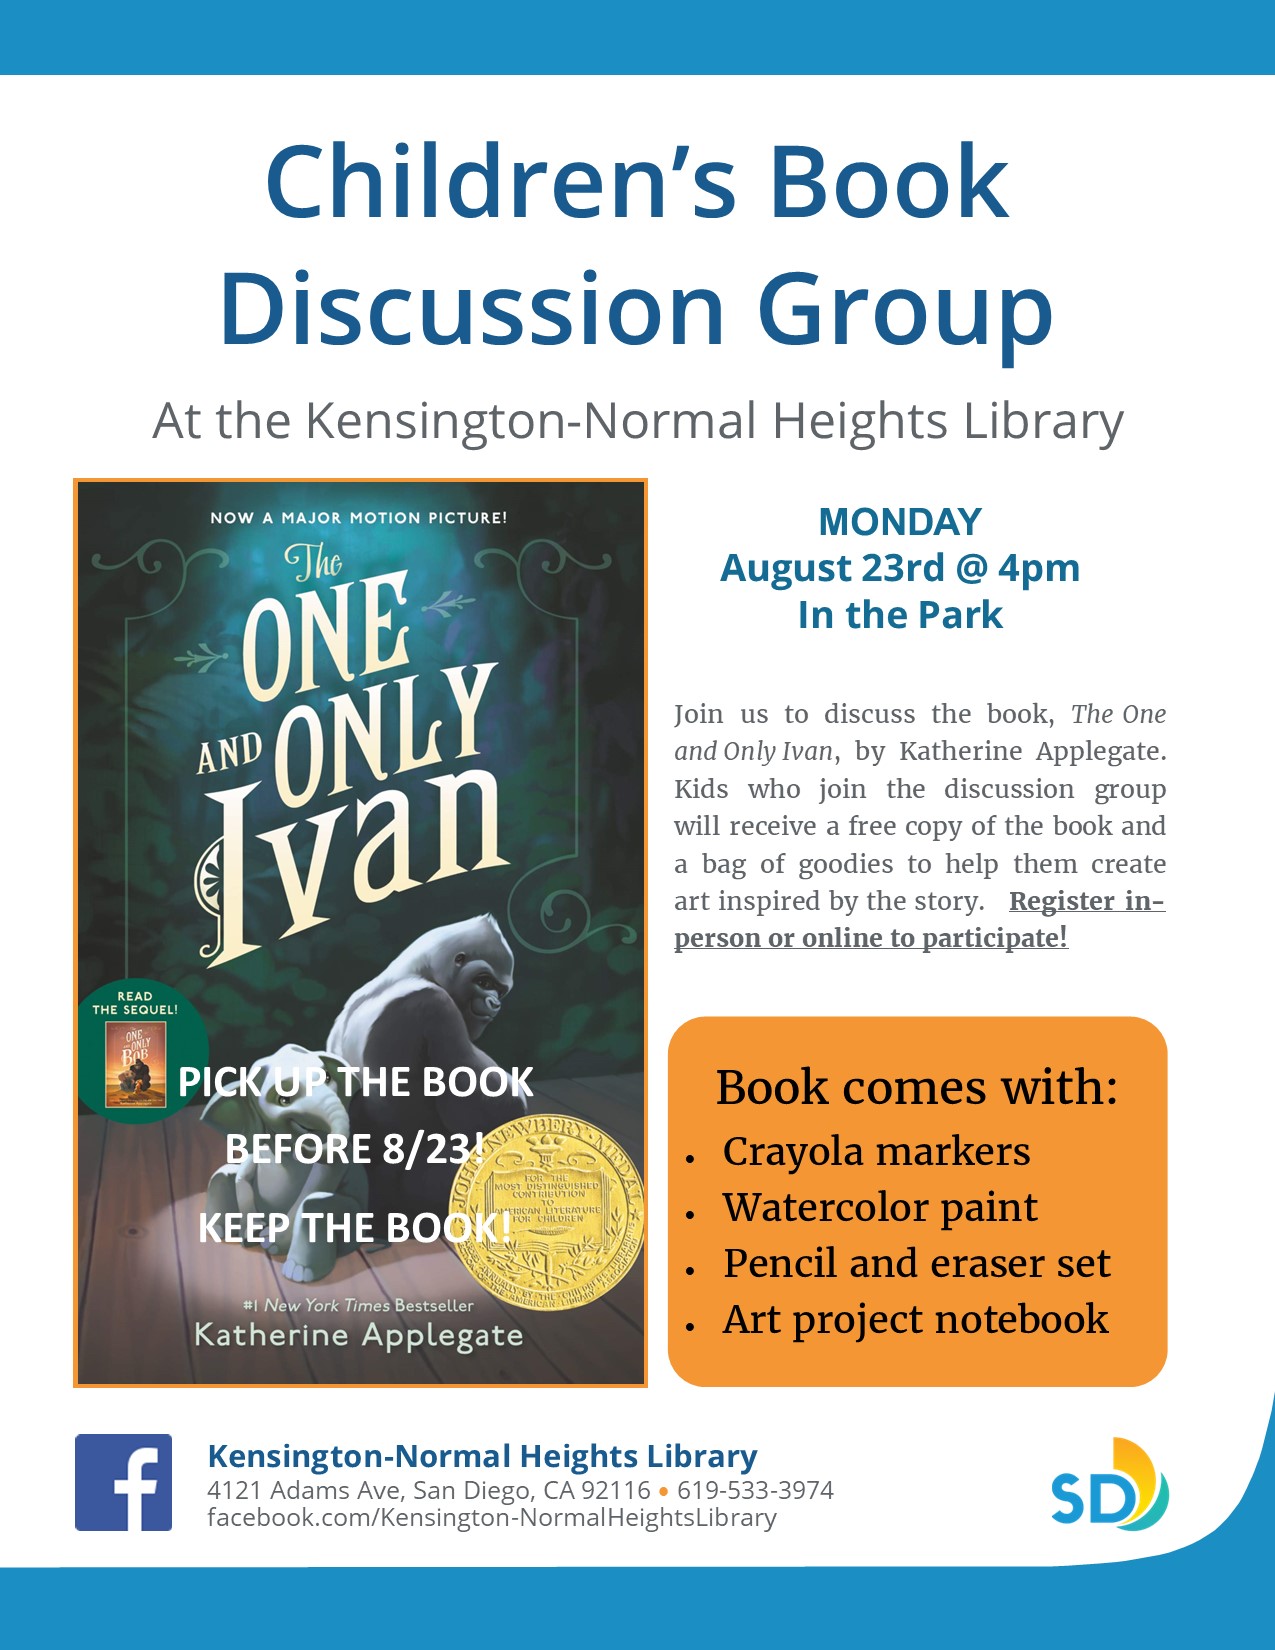 Children's Book Discussion Group in the Park